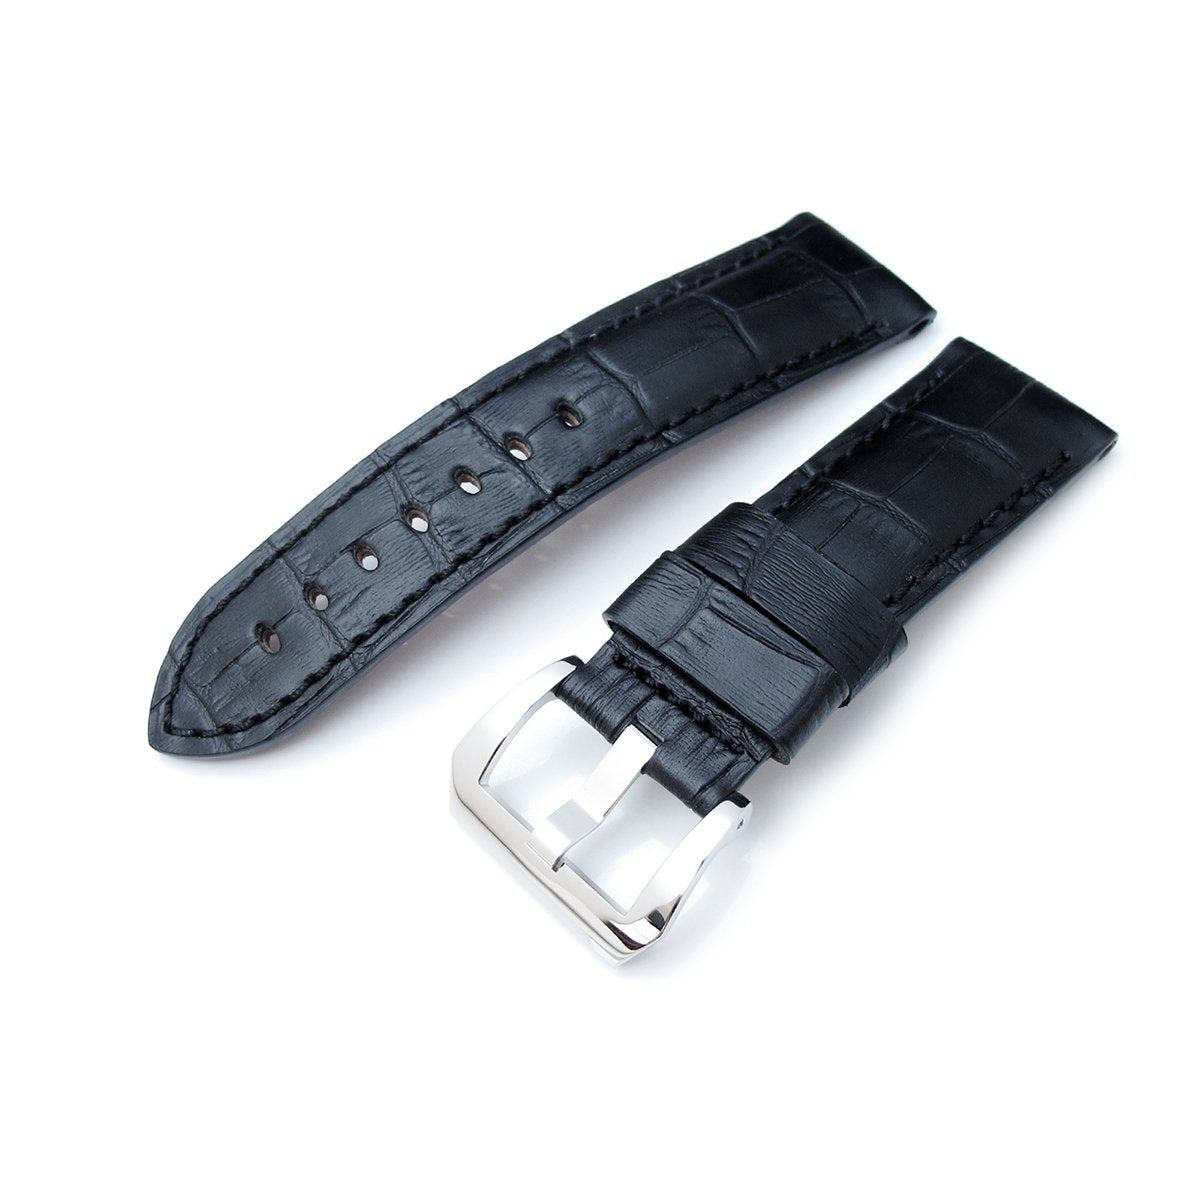 24mm CrocoCalf (Croco Grain) Matte Black Watch Strap with Black Stitches Polished Screw-in Buckle Strapcode Watch Bands